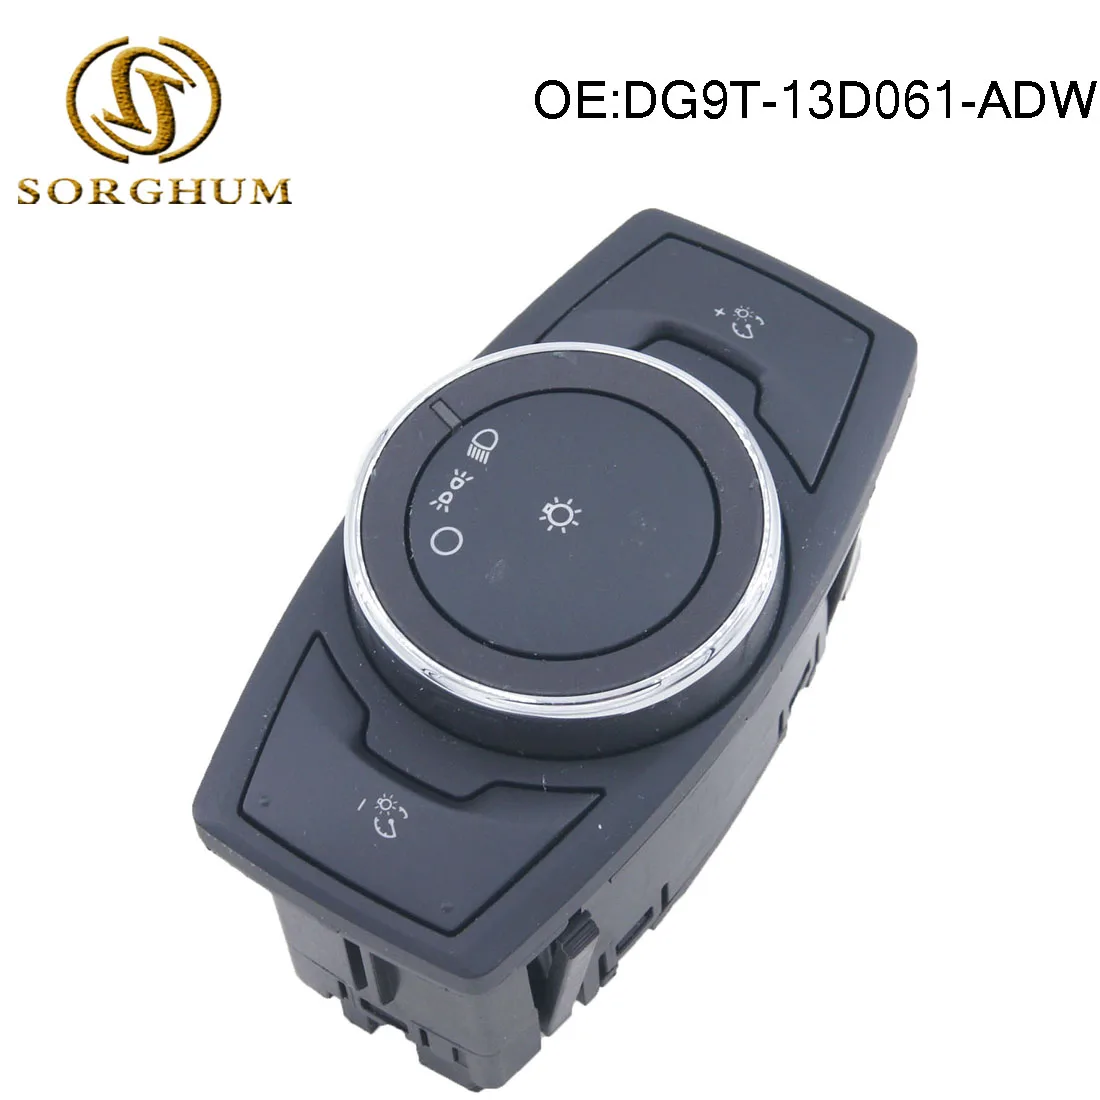 

DG9T-13D061-ADW Foglight Headlight Control Switch For Ford Fusion 2002-2012